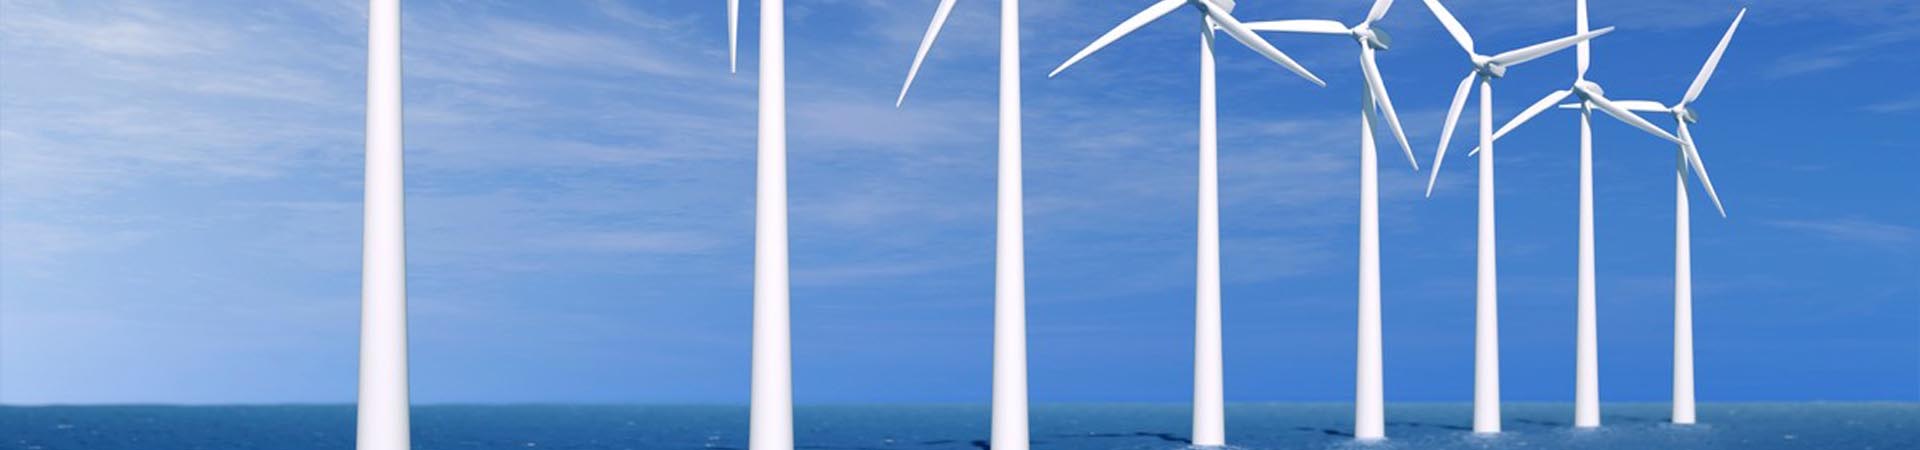 Image showing a row of offshore wind turbines